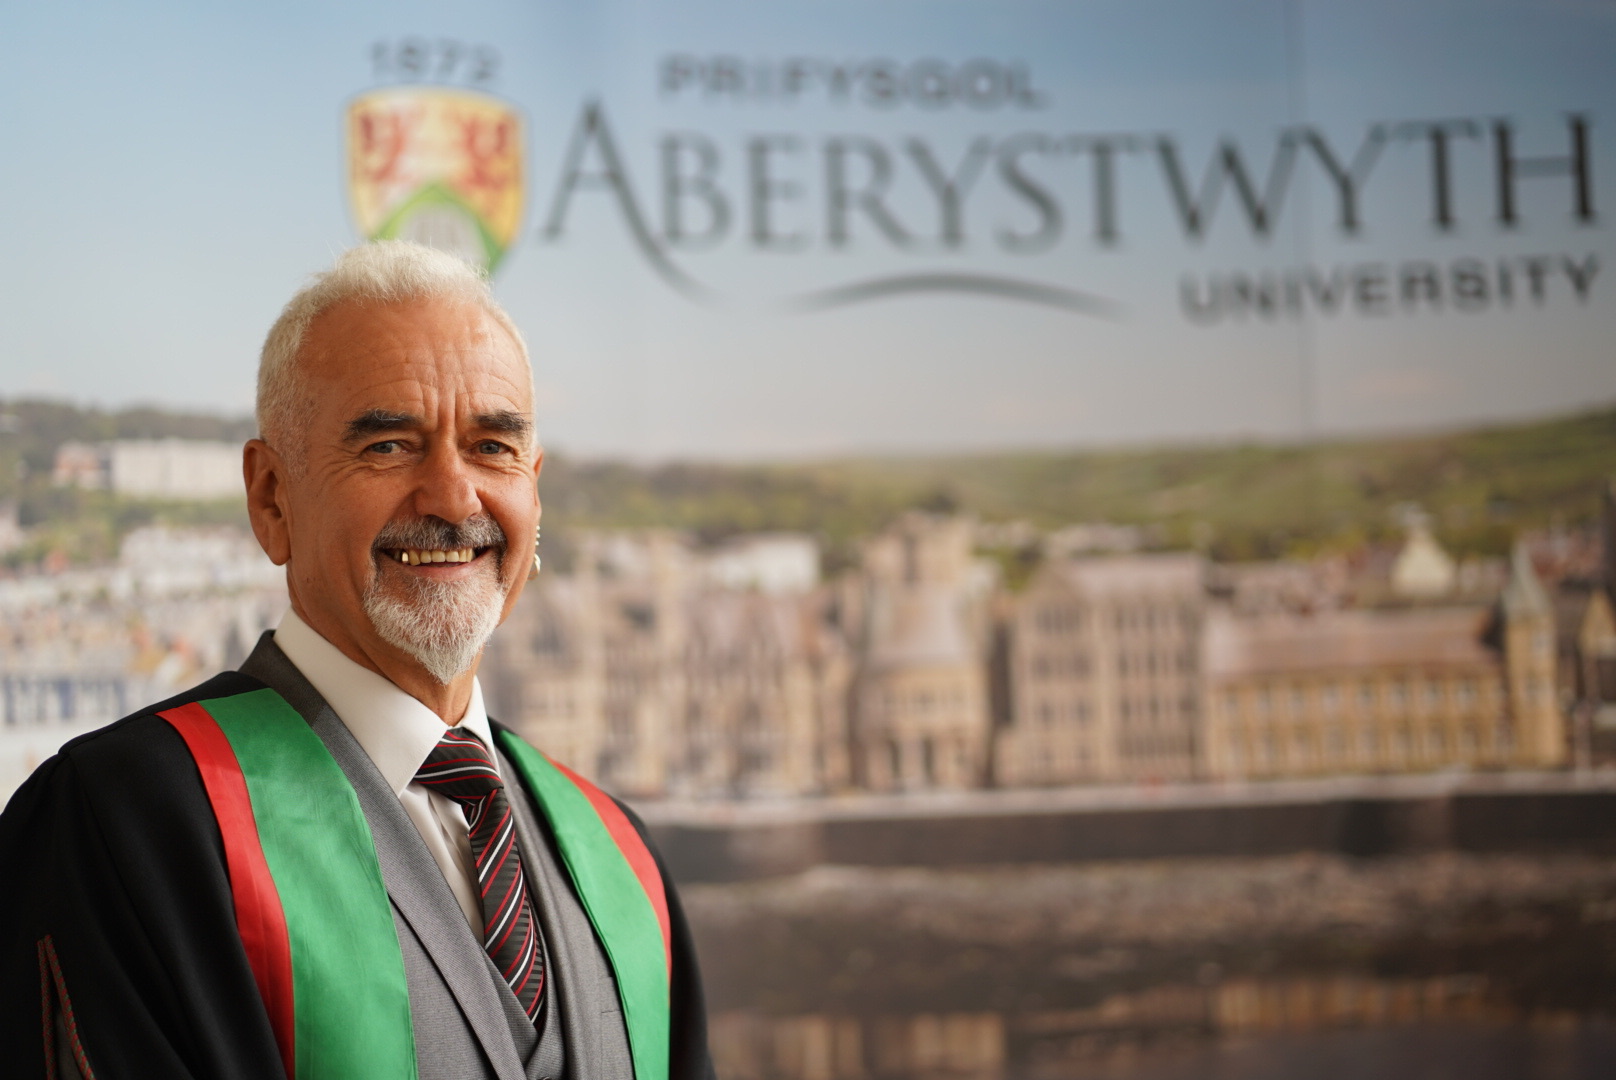 For selfless humanitarian work, Eric Harries was presented with an Honorary Bachelor of Science degree from Aberystwyth University at Graduation 2018.